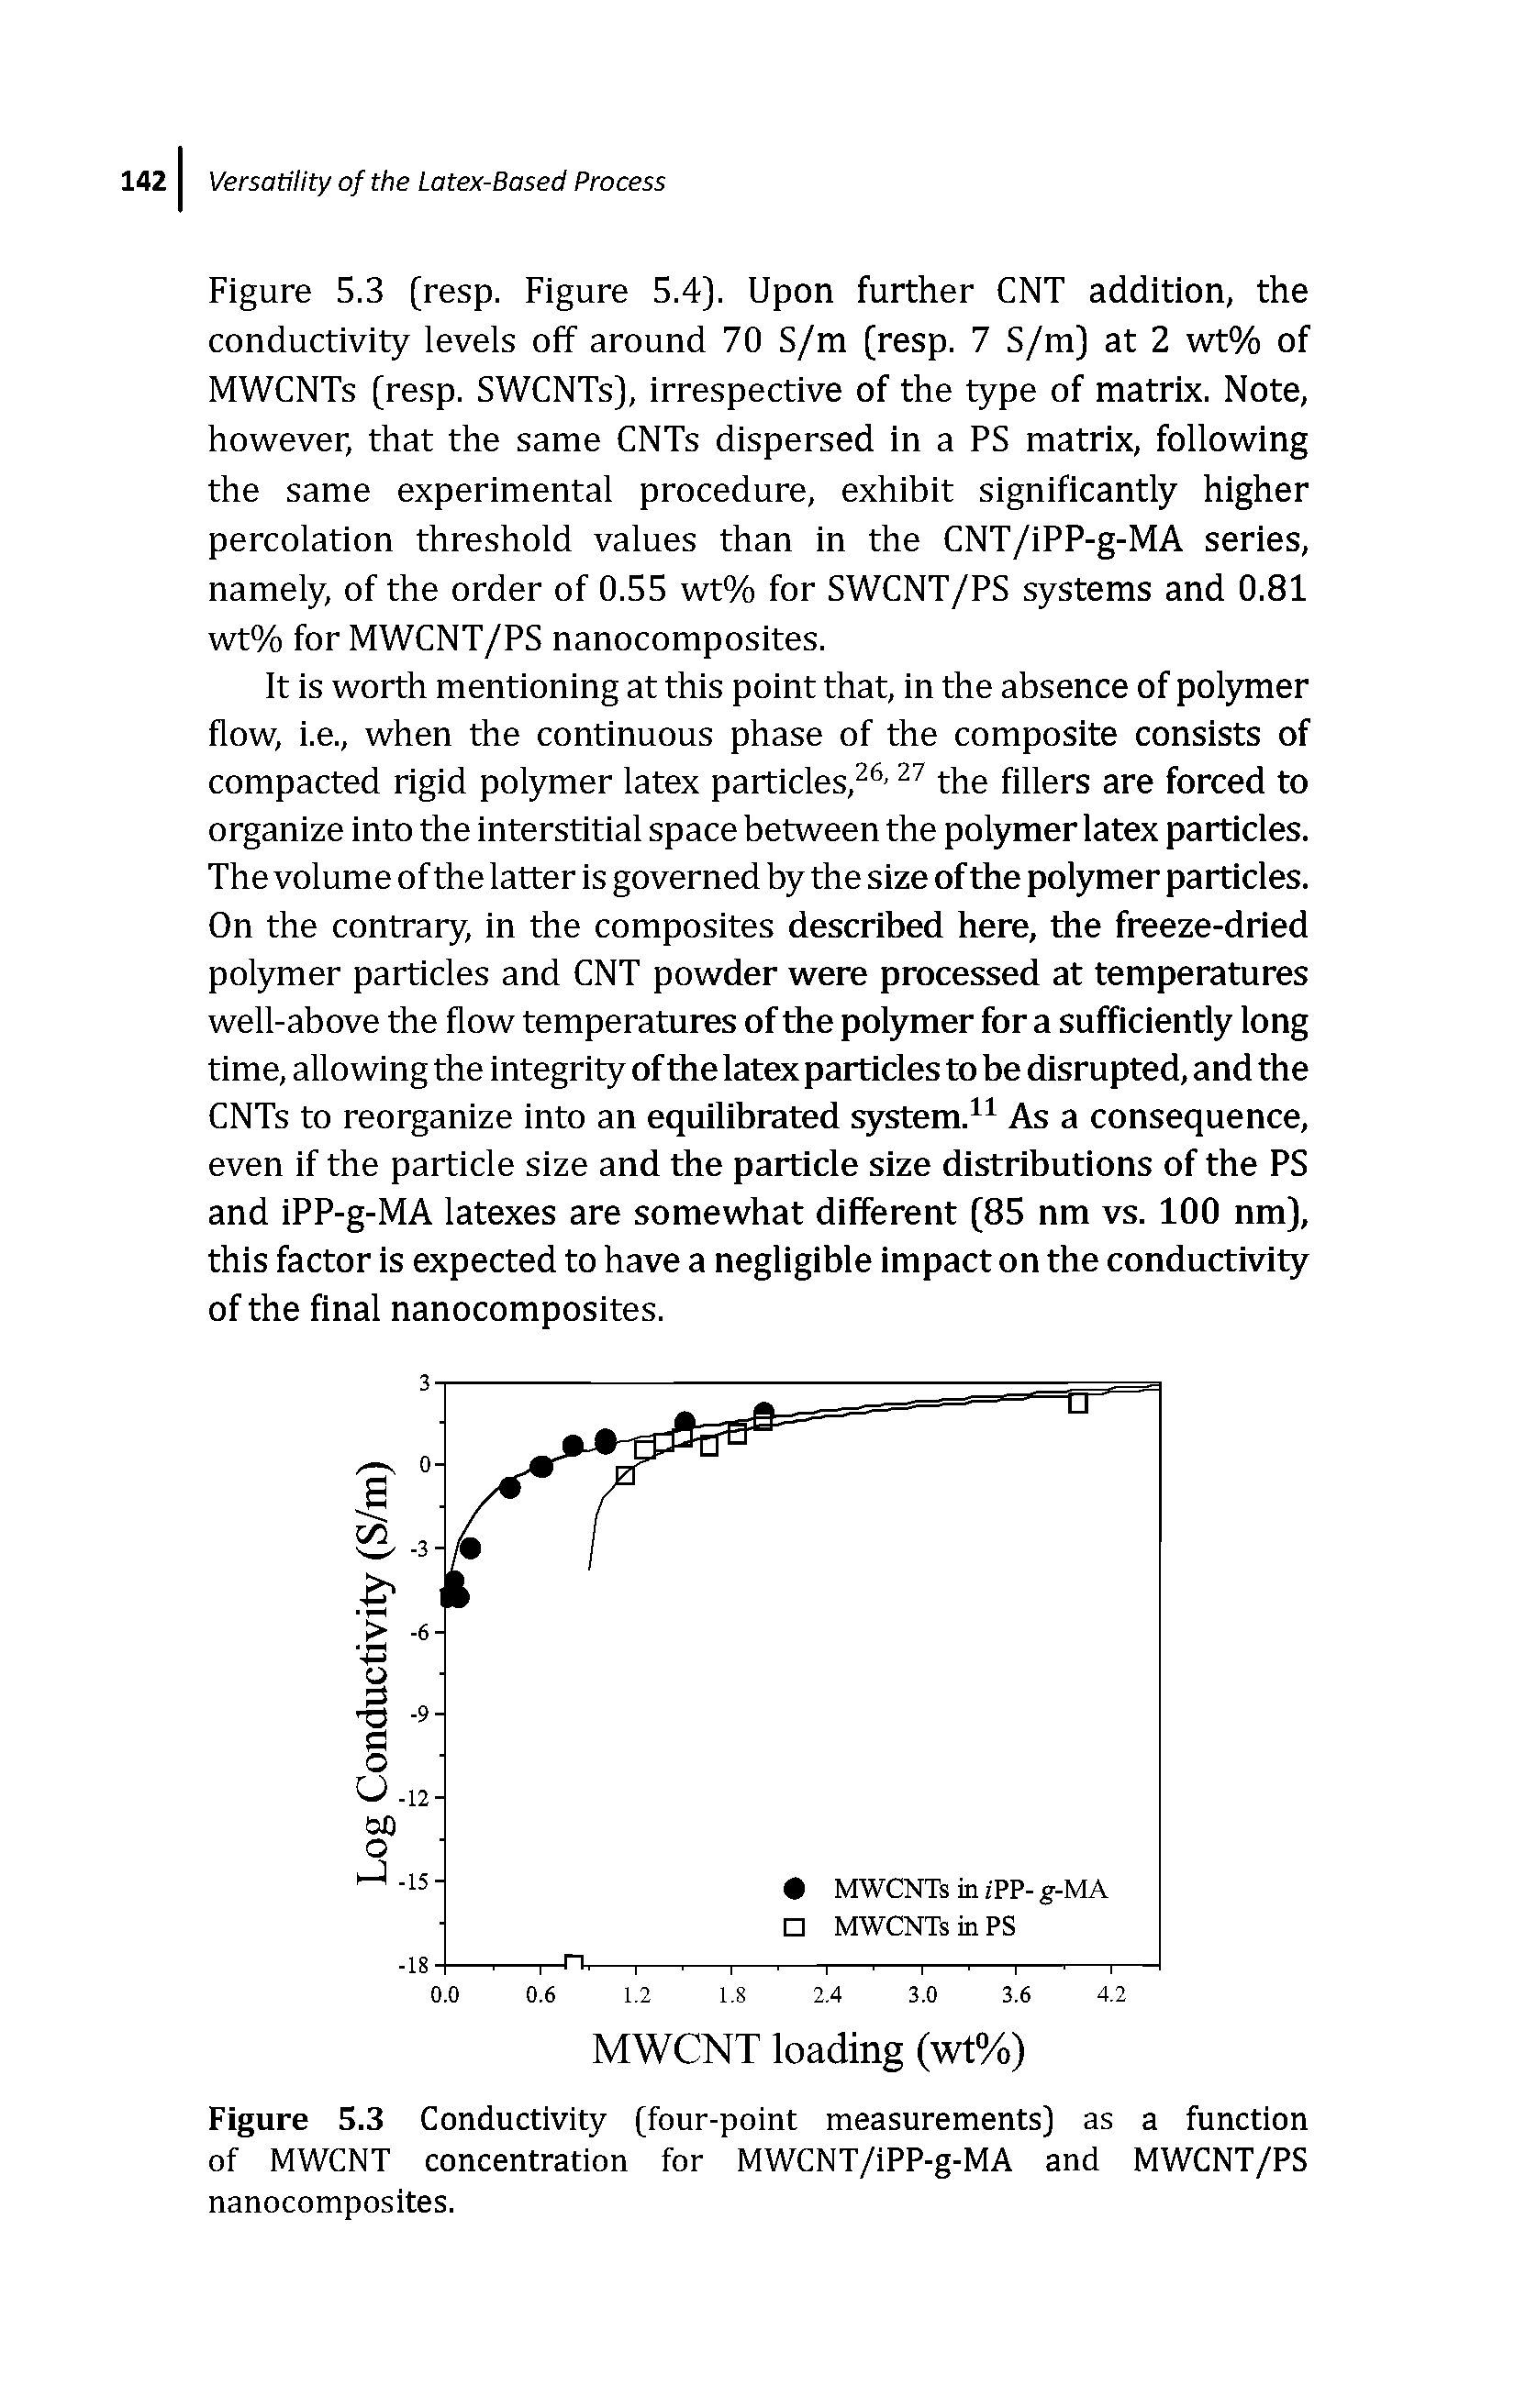 Figure 5.3 Conductivity (four-point measurements) as a function of MWCNT concentration for MWCNT/iPP-g-MA and MWCNT/PS nanocomposites.